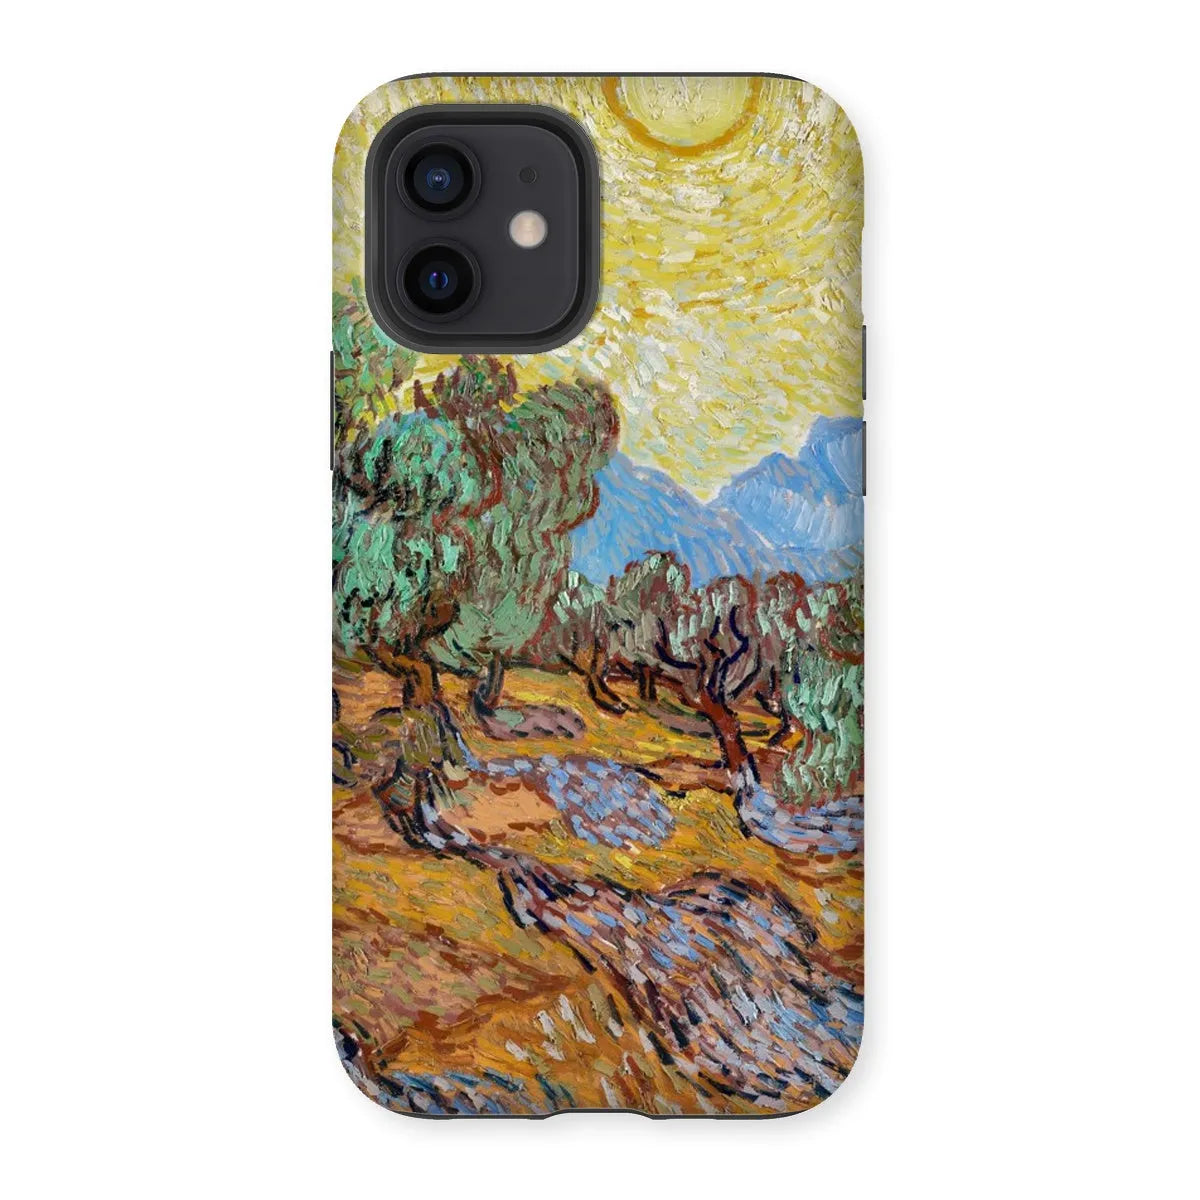 Olive Trees Too - Impressionist Phone Case - Vincent Van Gogh - Iphone 12 / Matte - Mobile Phone Cases - Aesthetic Art